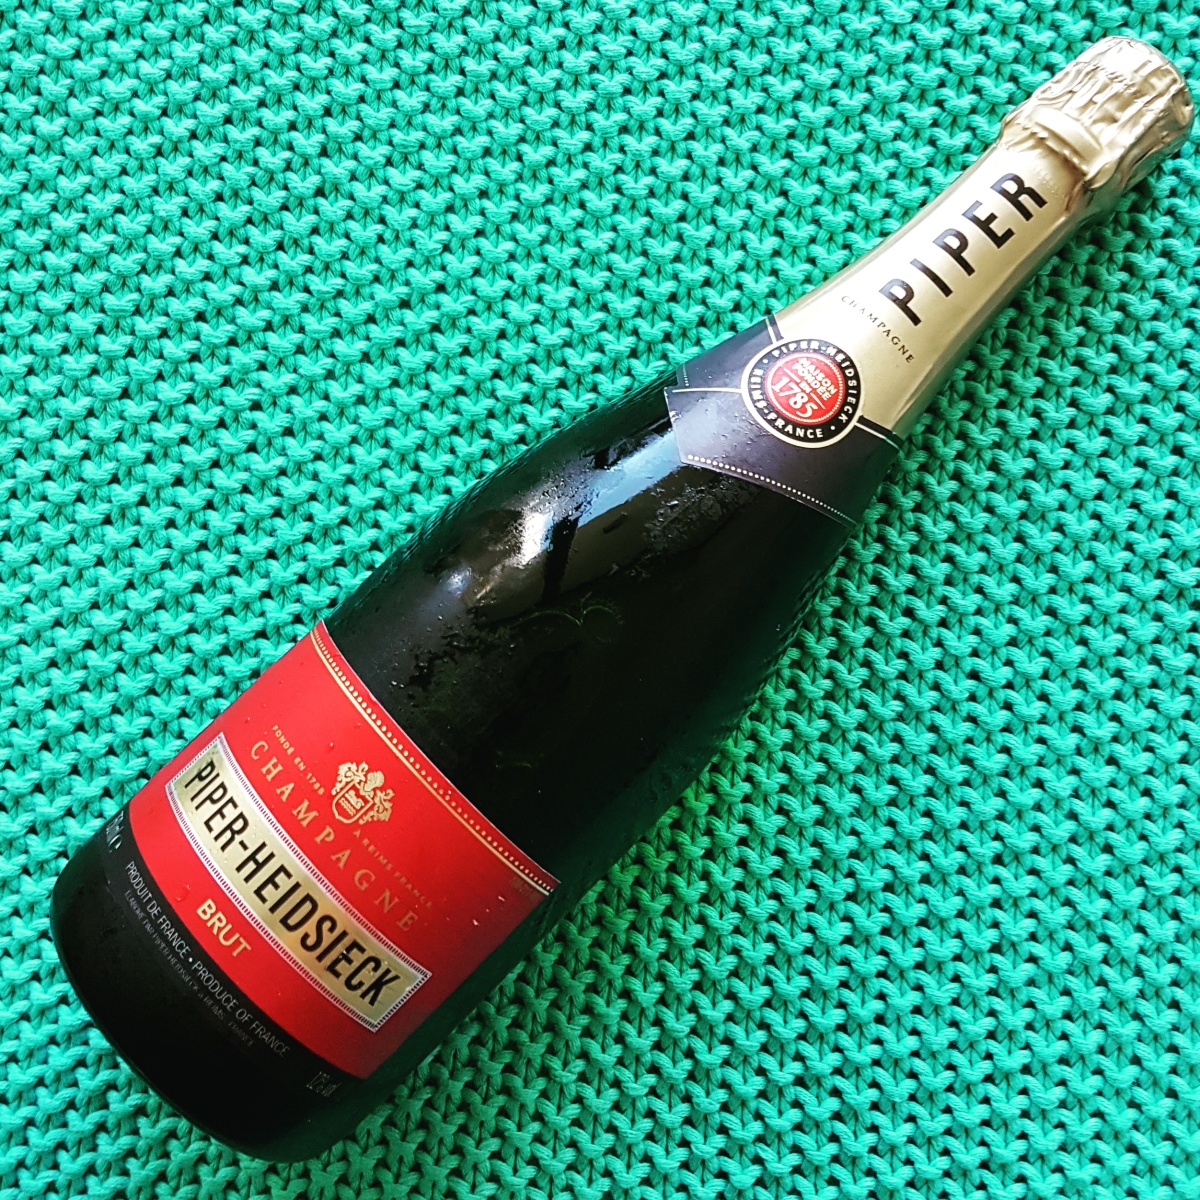 Review: Piper Heidsieck Cuvee Brut NV – Champagne Tips